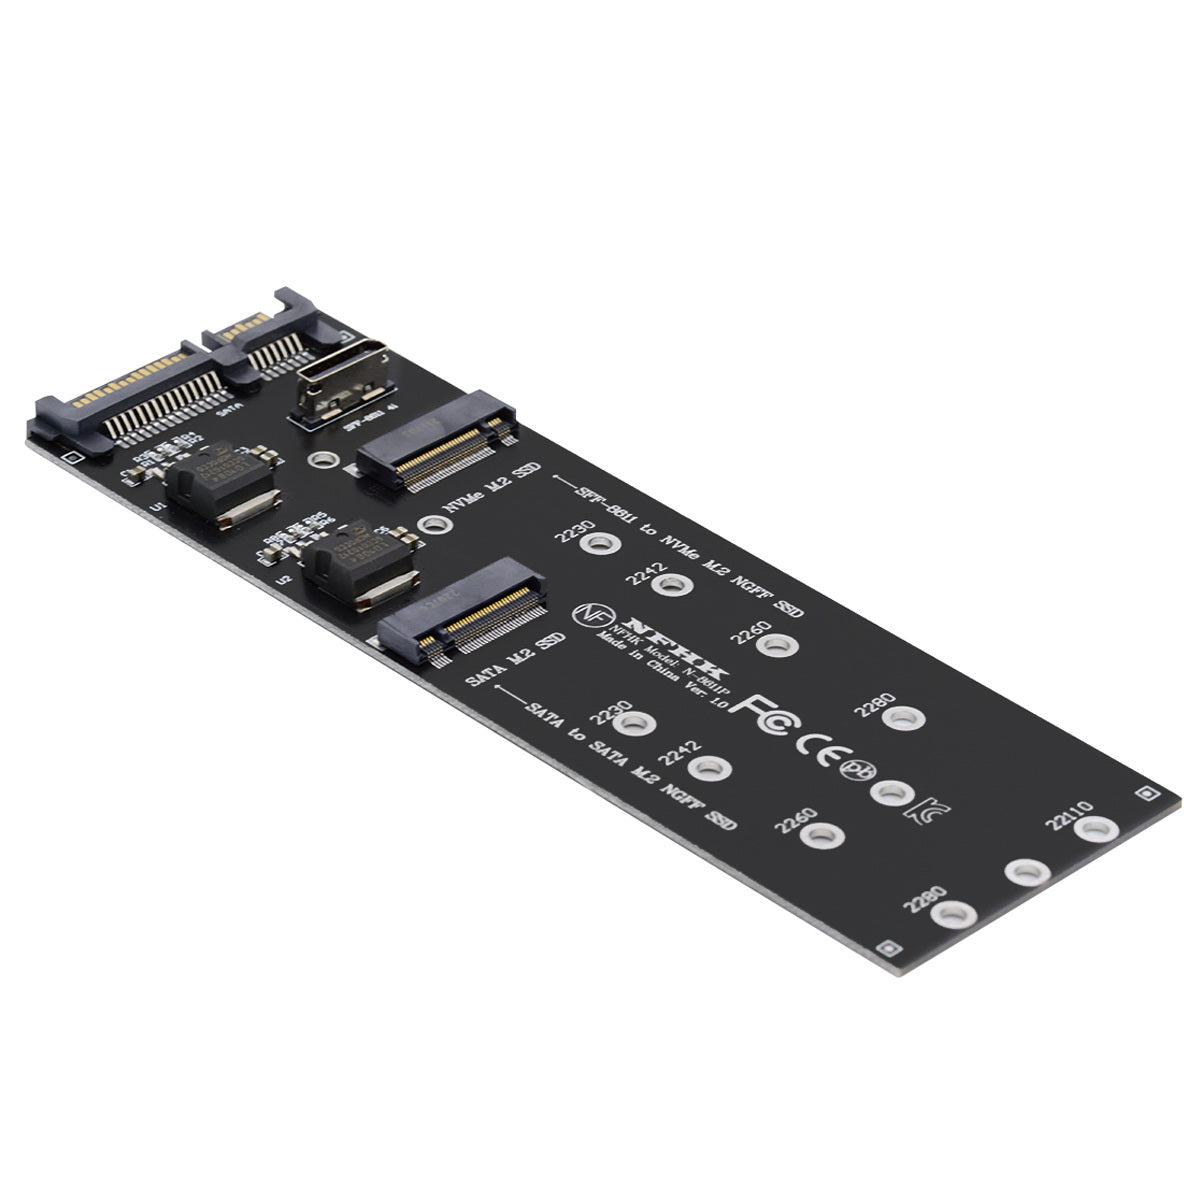 SF-055 Oculink SFF-8612 8611 to U.2 Kit M-Key to NVME PCIe SSD and NGFF to SATA Adapter for Mainboard